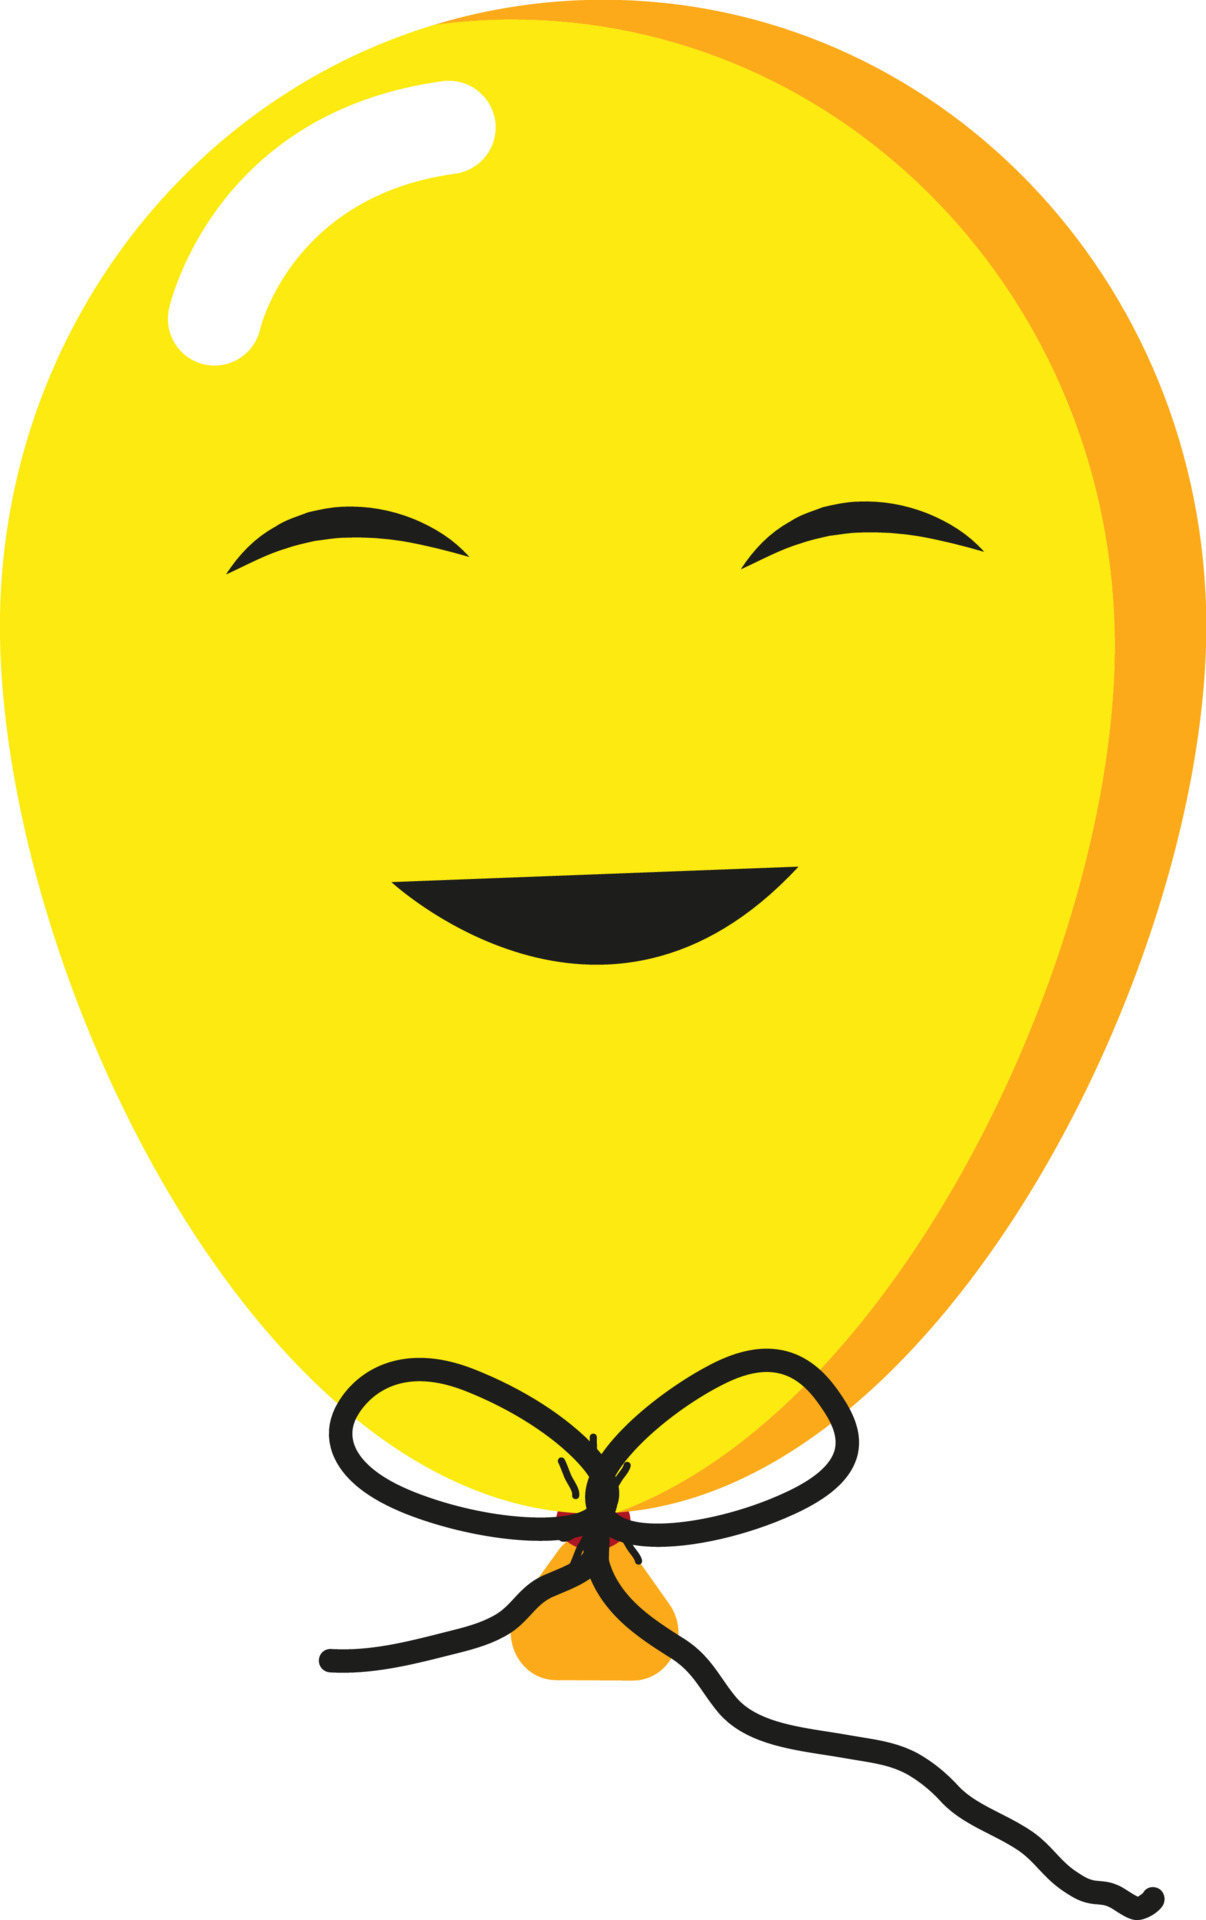 Laughing yellow balloon, illustration, vector on a white background ...